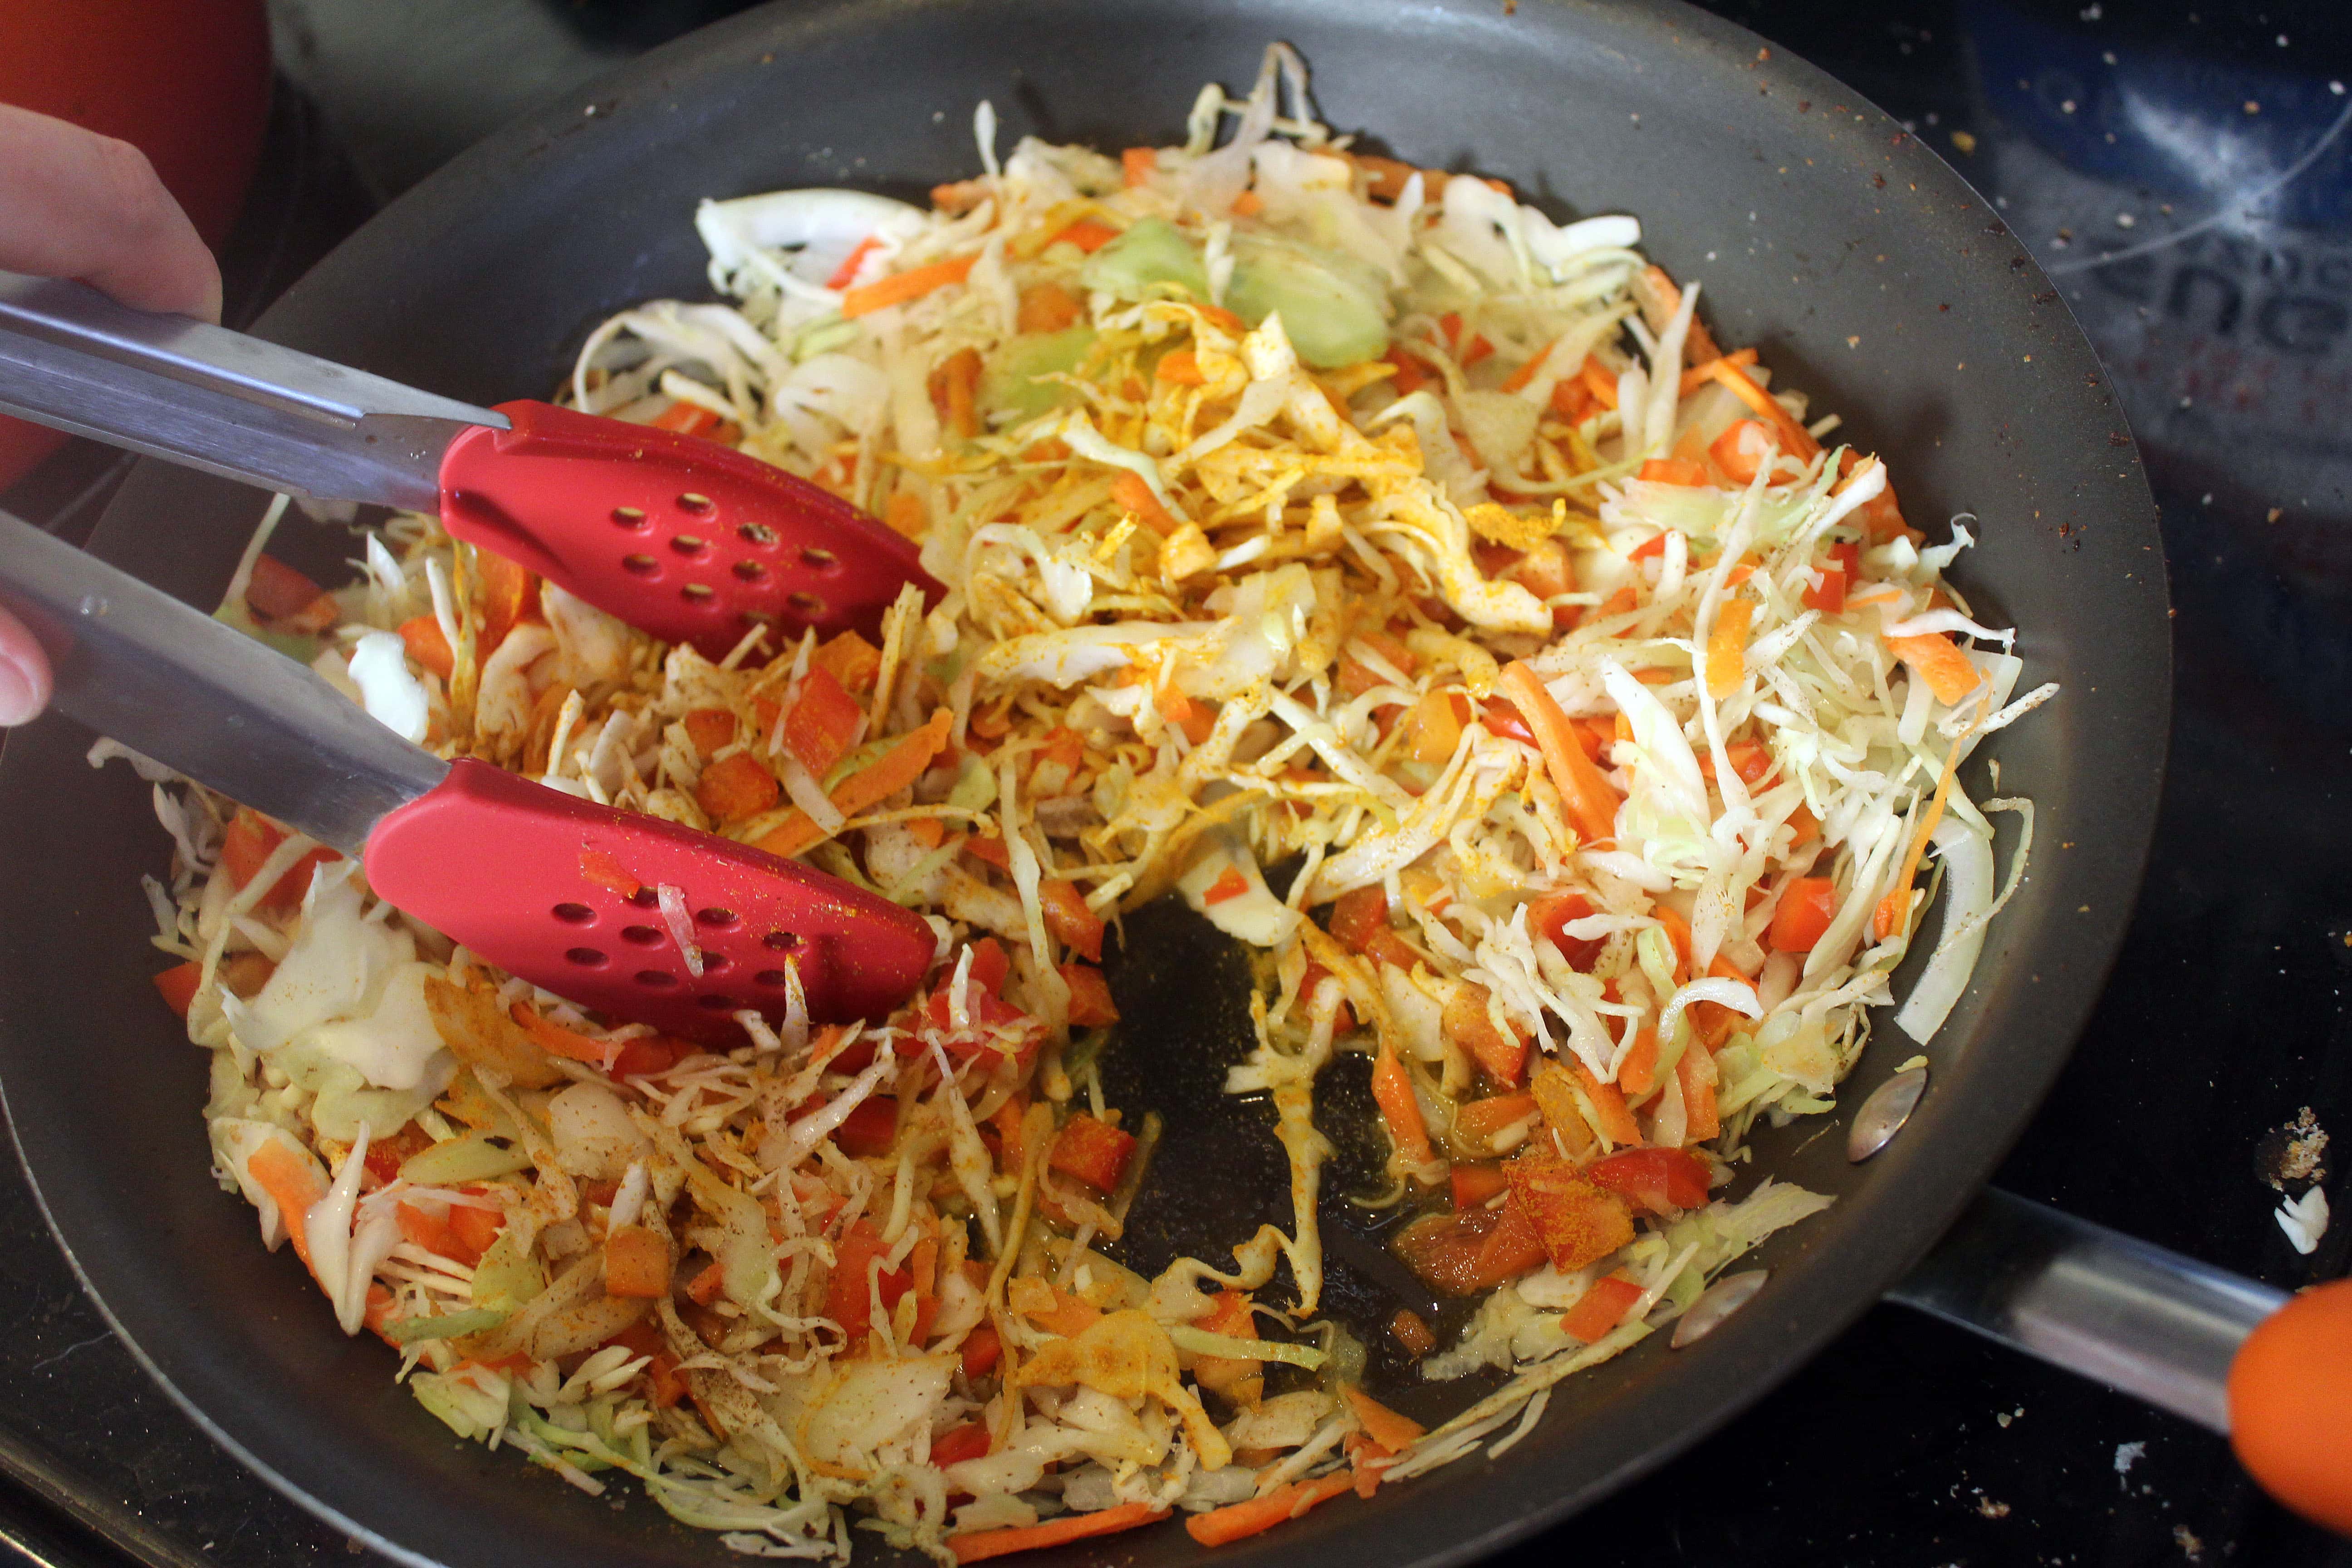 Use tongs to incorporate spices